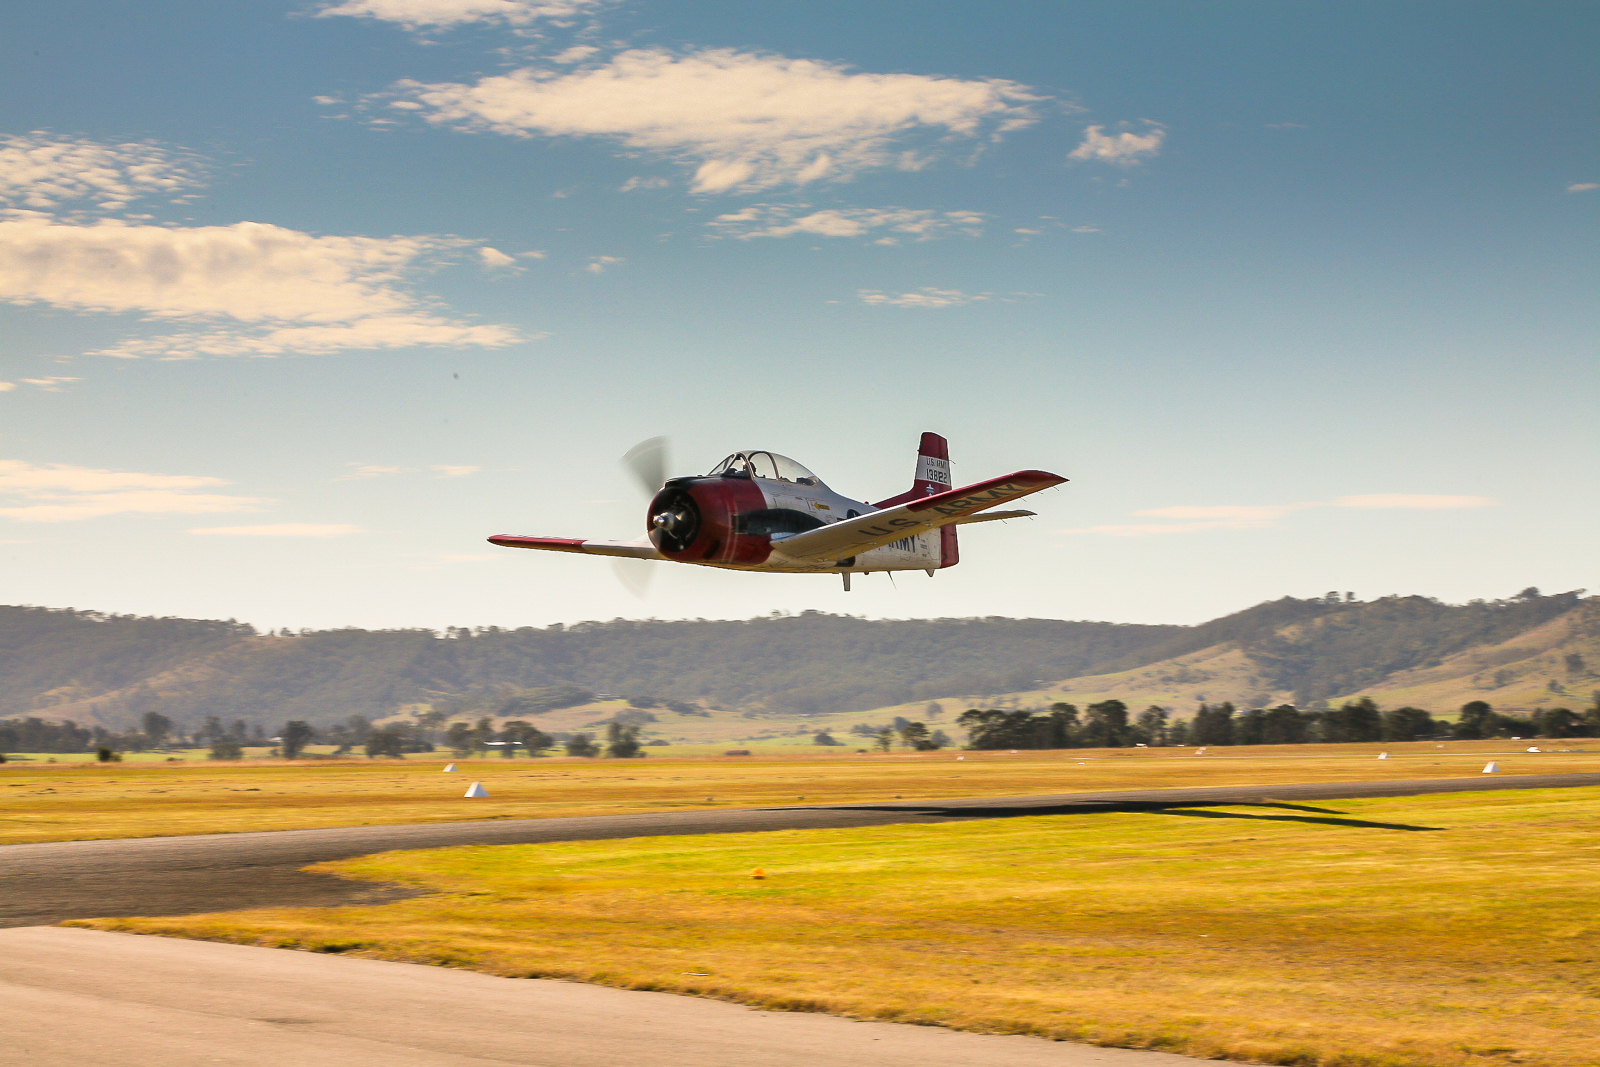 Paul Bennet Airshows' T-28 Trojan on takeoff. (photo by Phil Buckley)